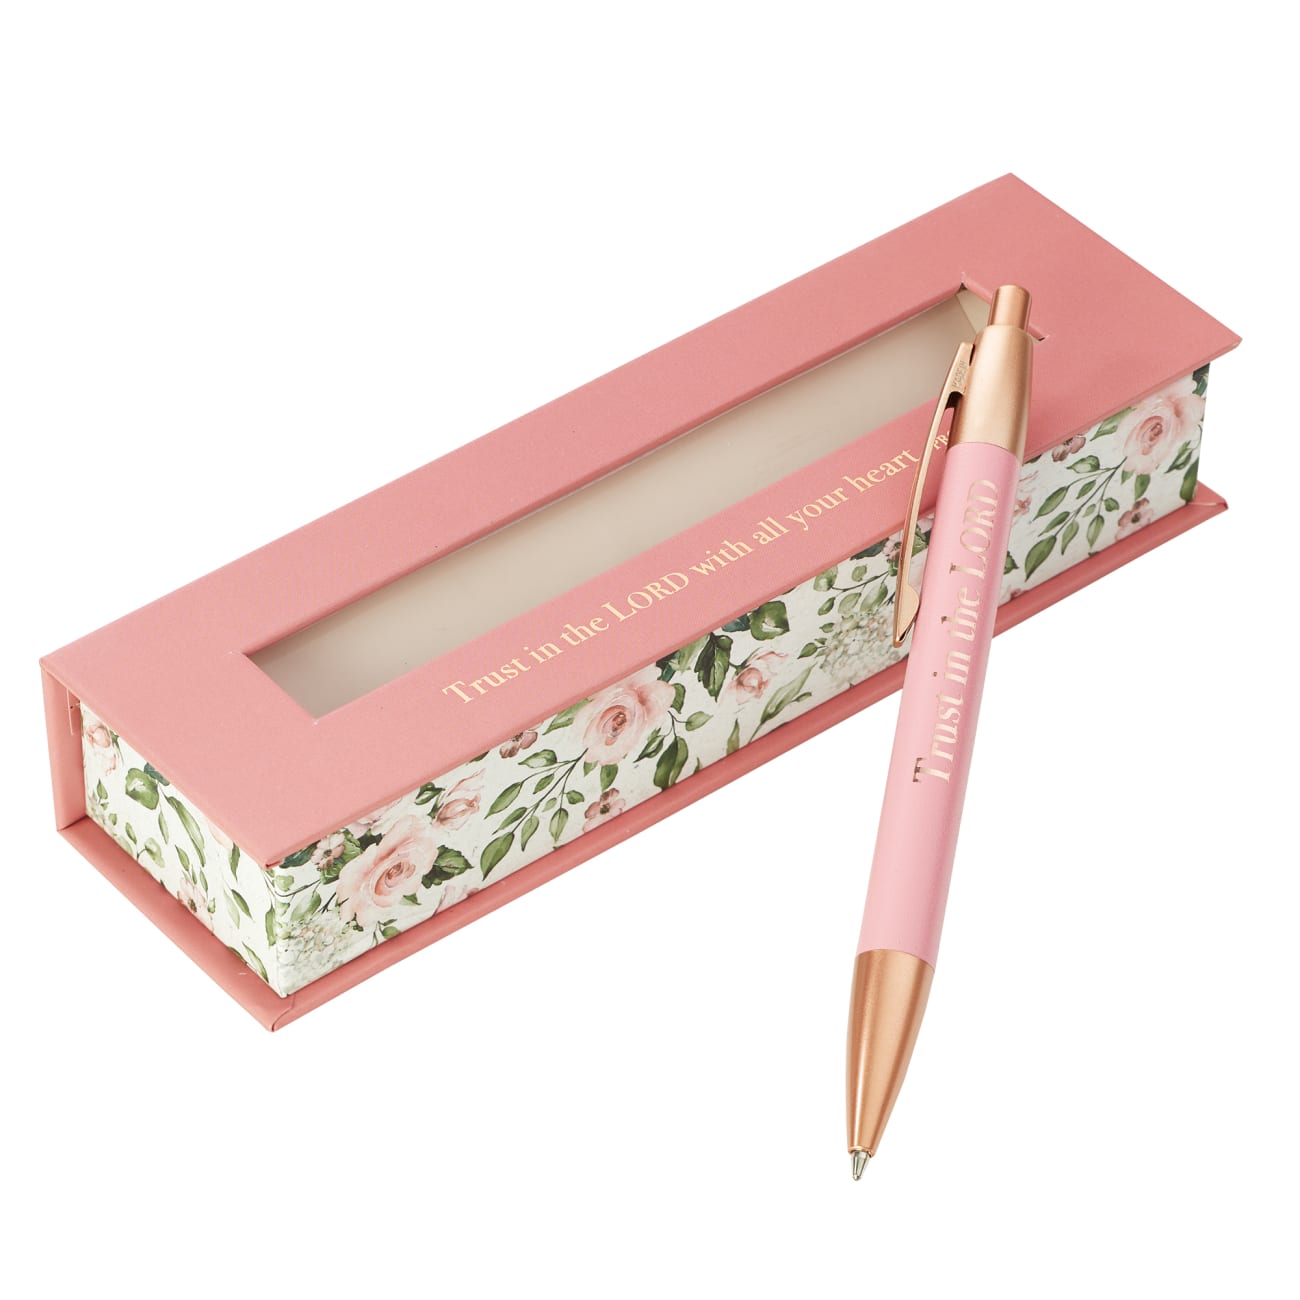 Ballpoint Pen in Gift Box: Trust in the Lord, Pink Floral (Proverbs 3:5) Pens & Pencils